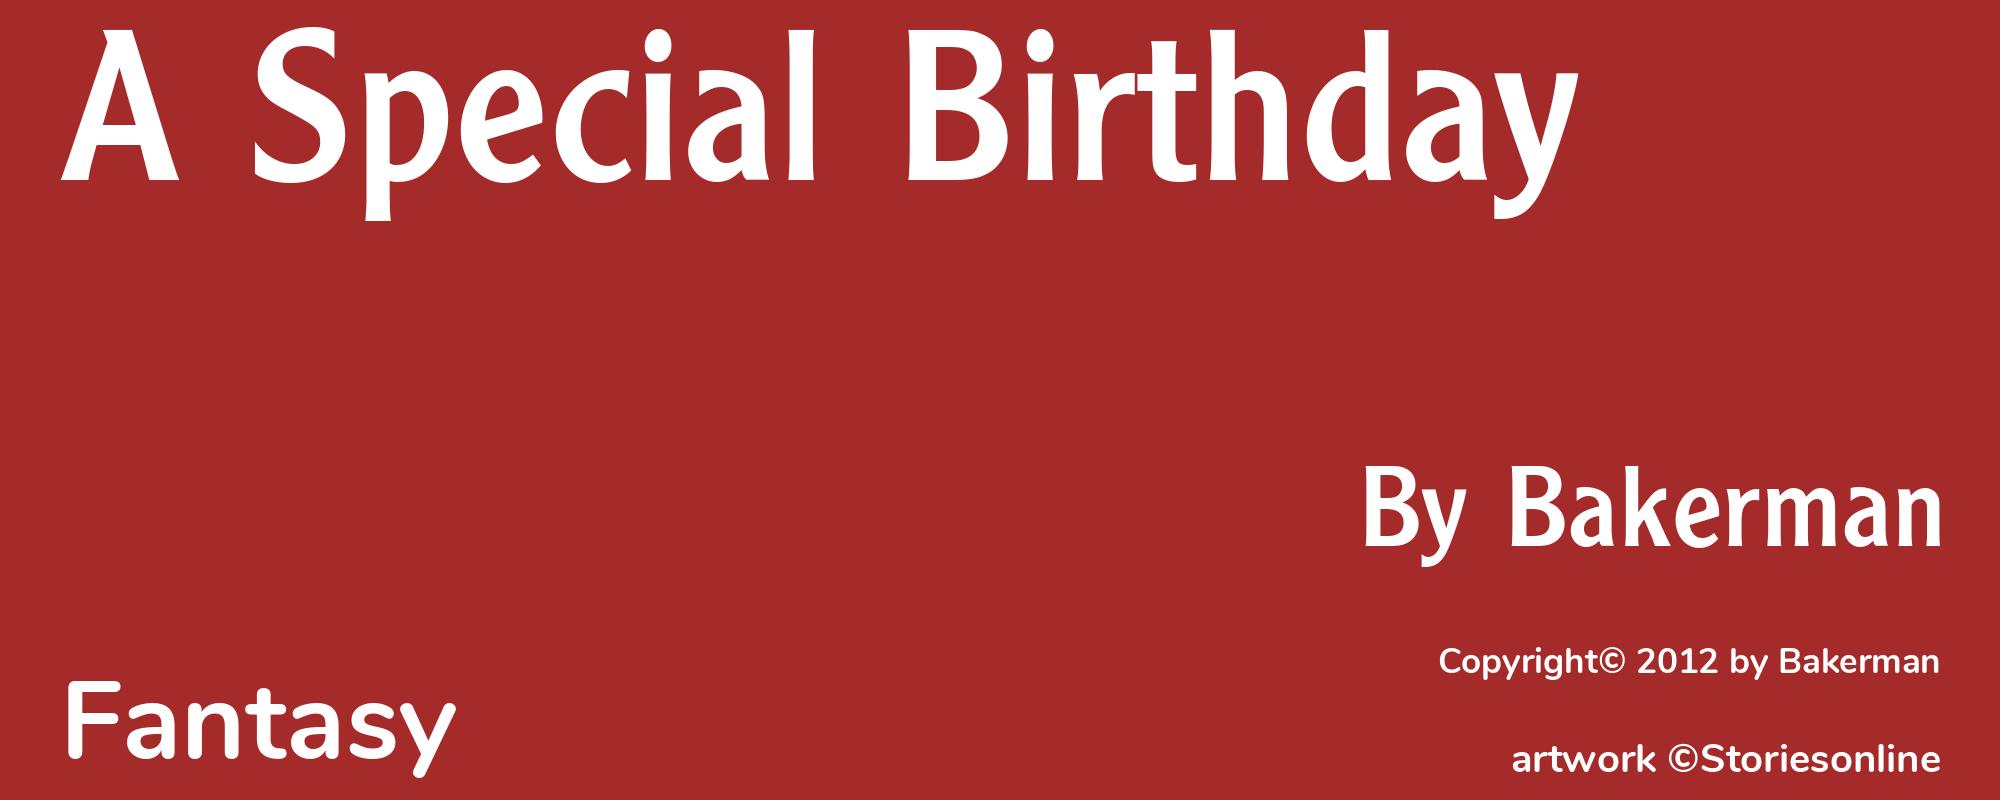 A Special Birthday - Cover